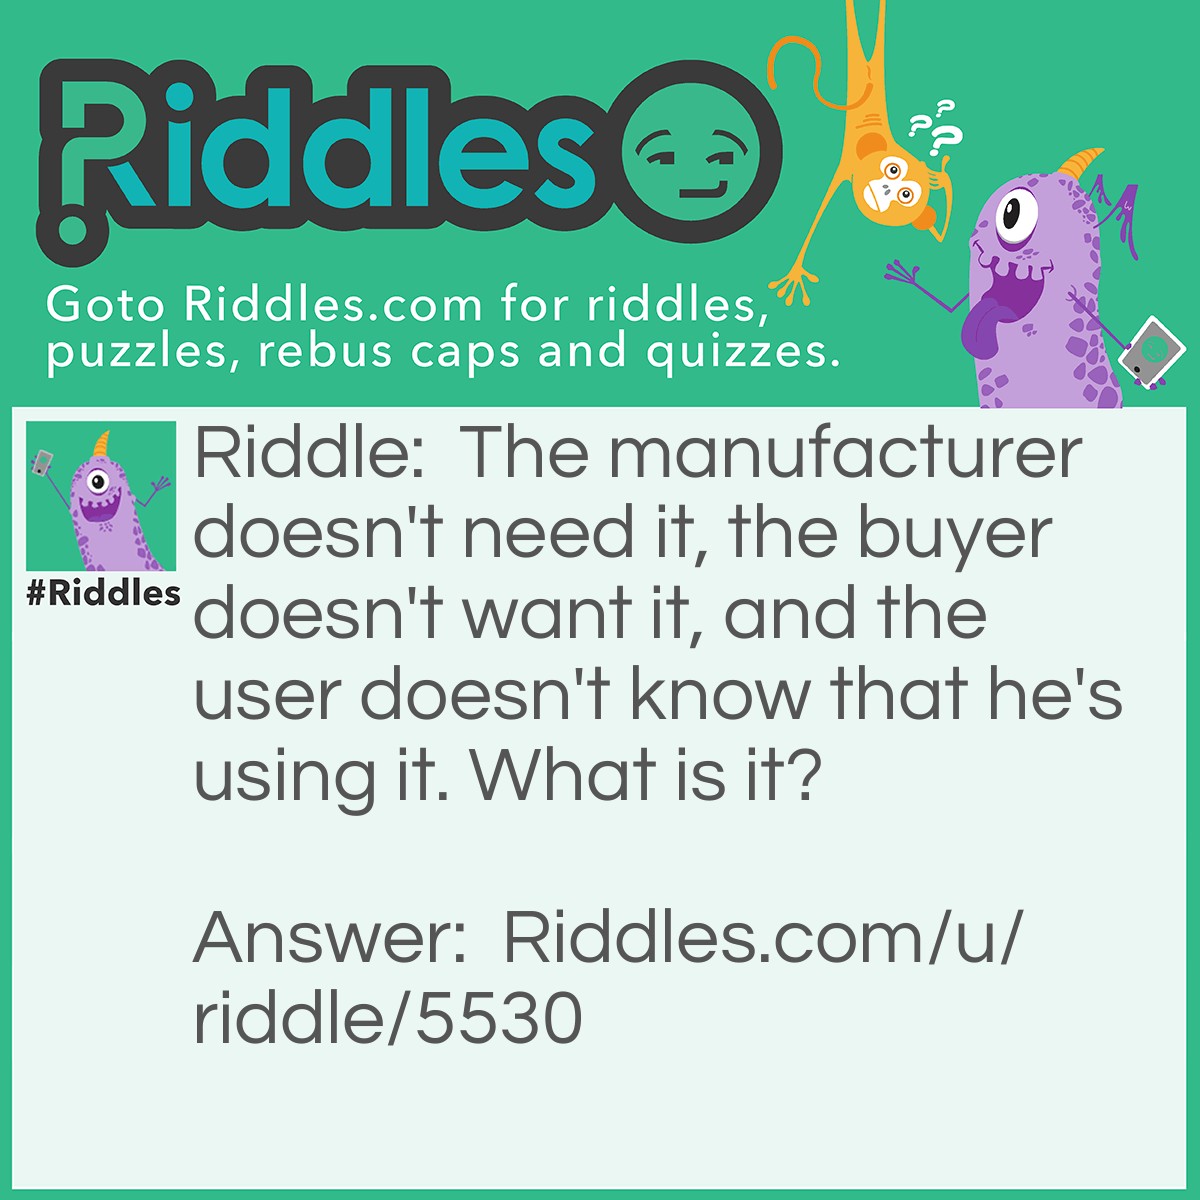 Riddle: The manufacturer doesn't need it, the buyer doesn't want it, and the user doesn't know that he's using it. What is it? Answer: A coffin.